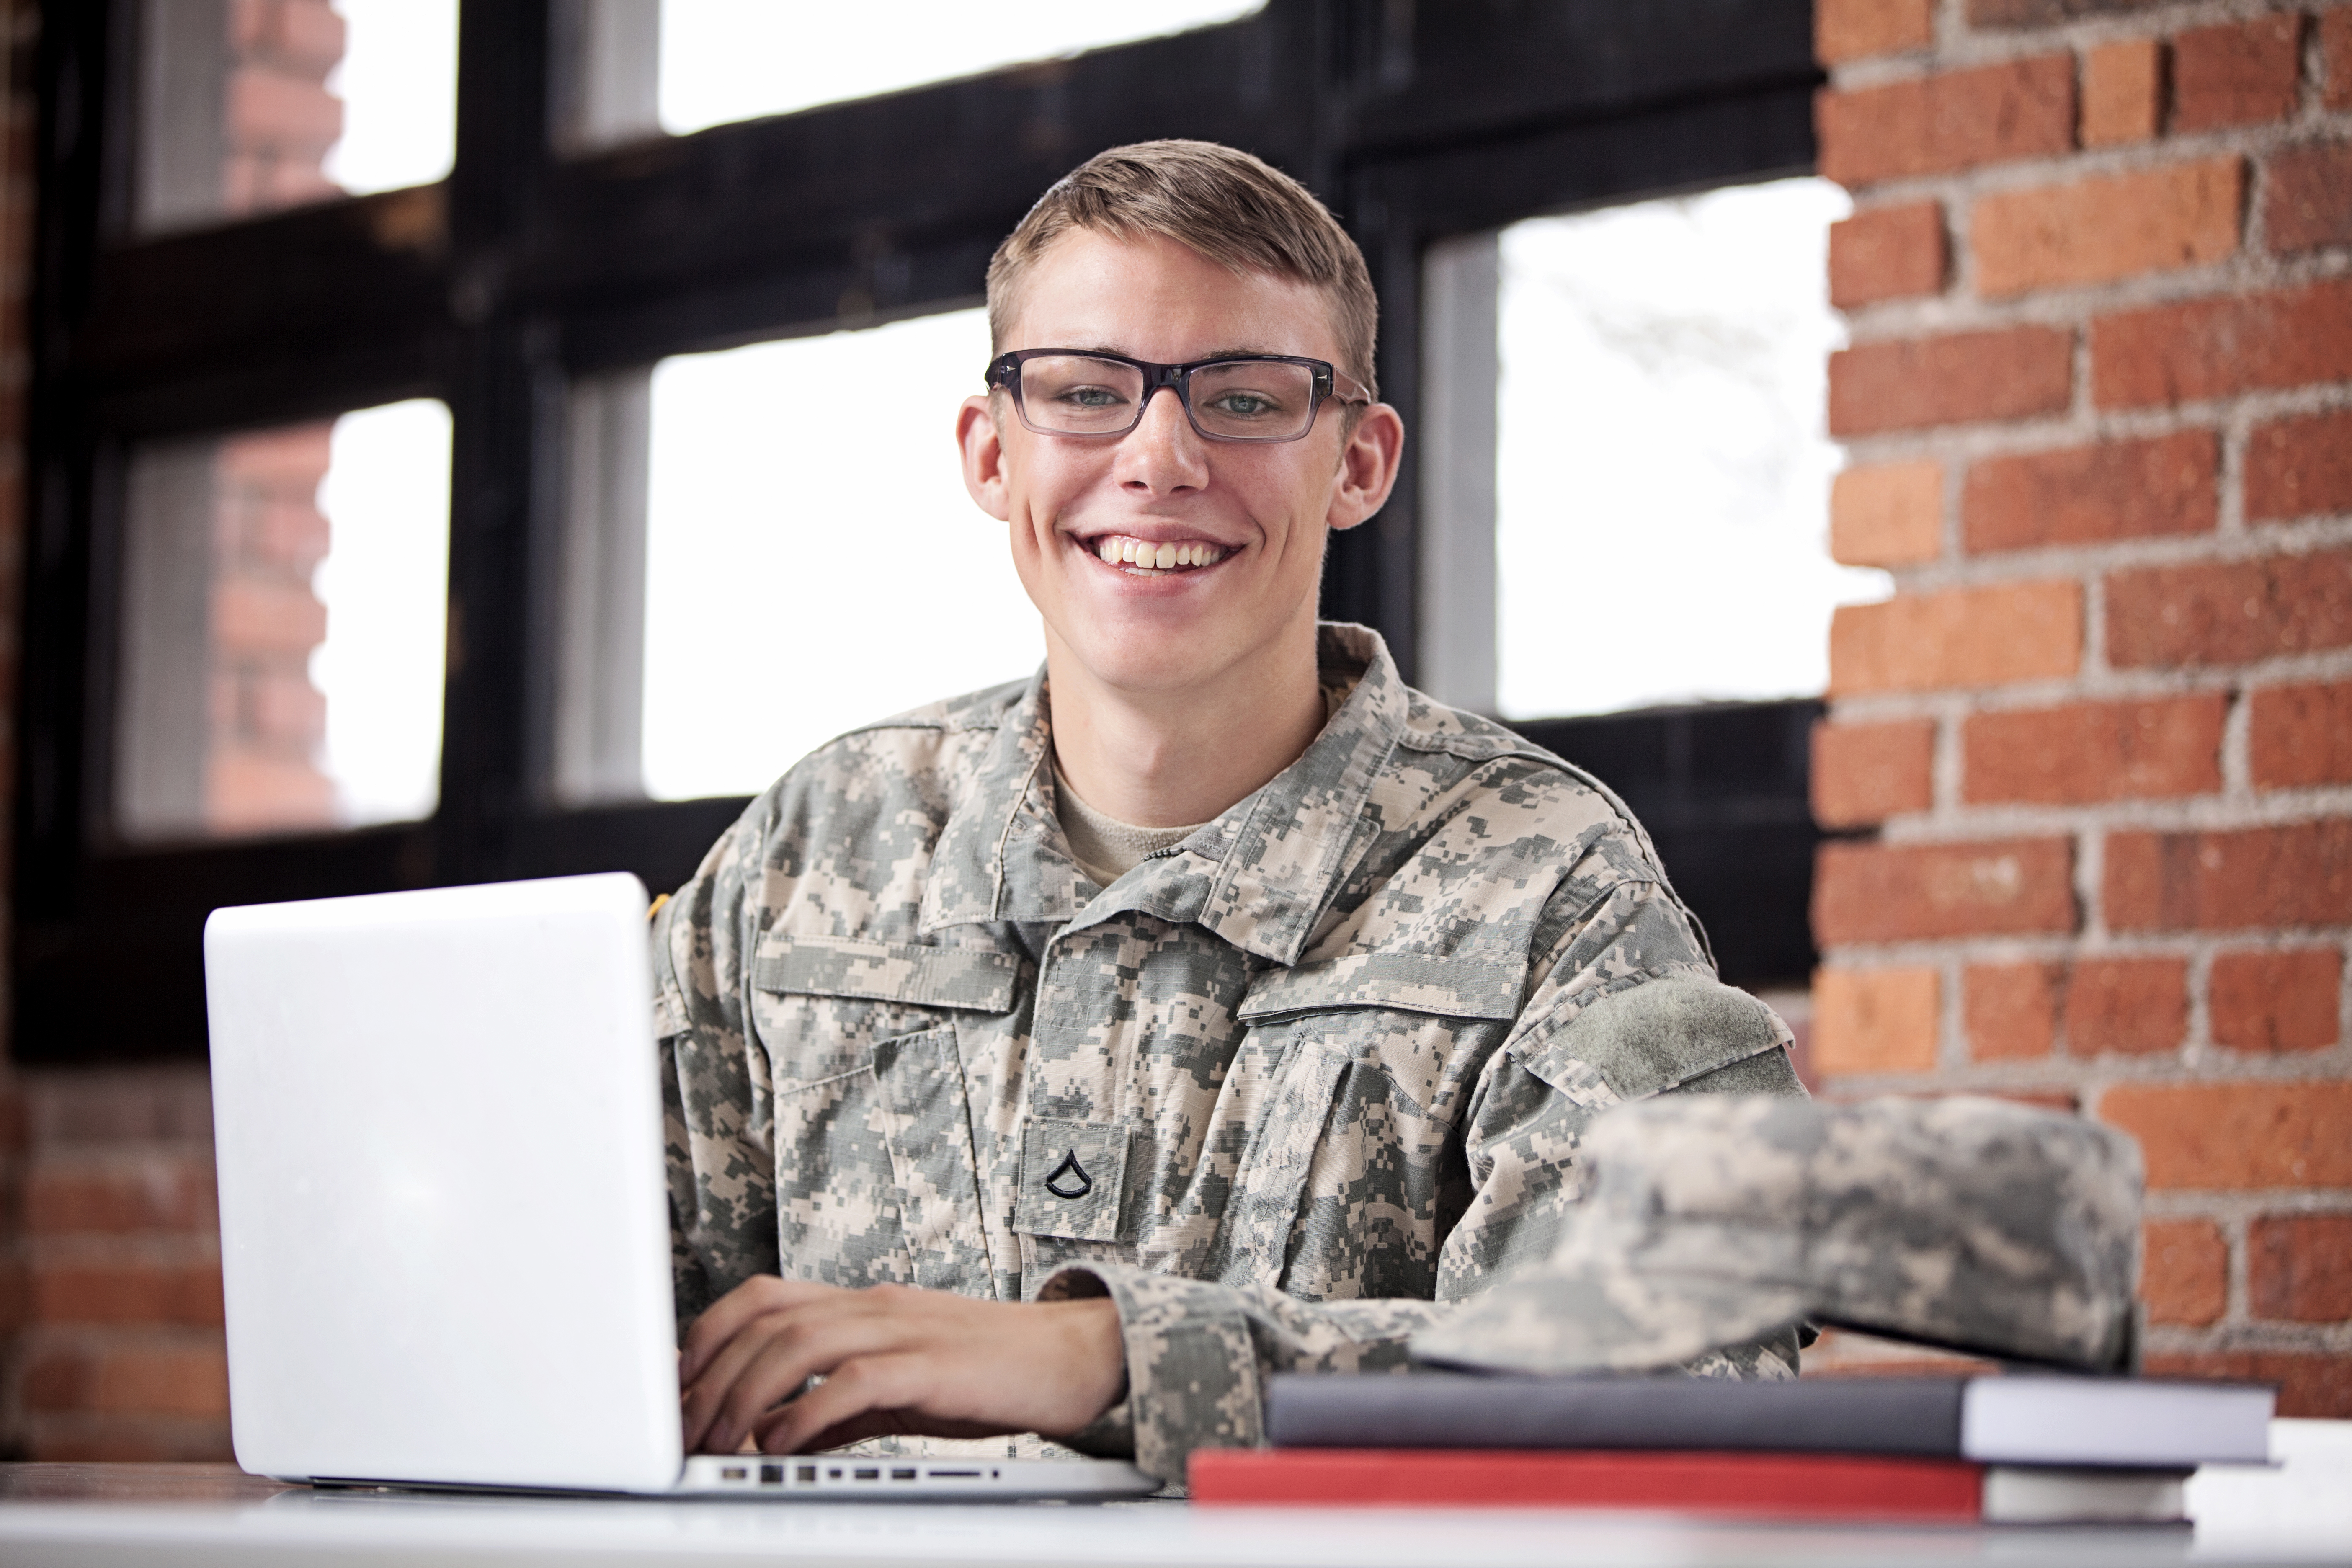 Photo of a soldier studying online